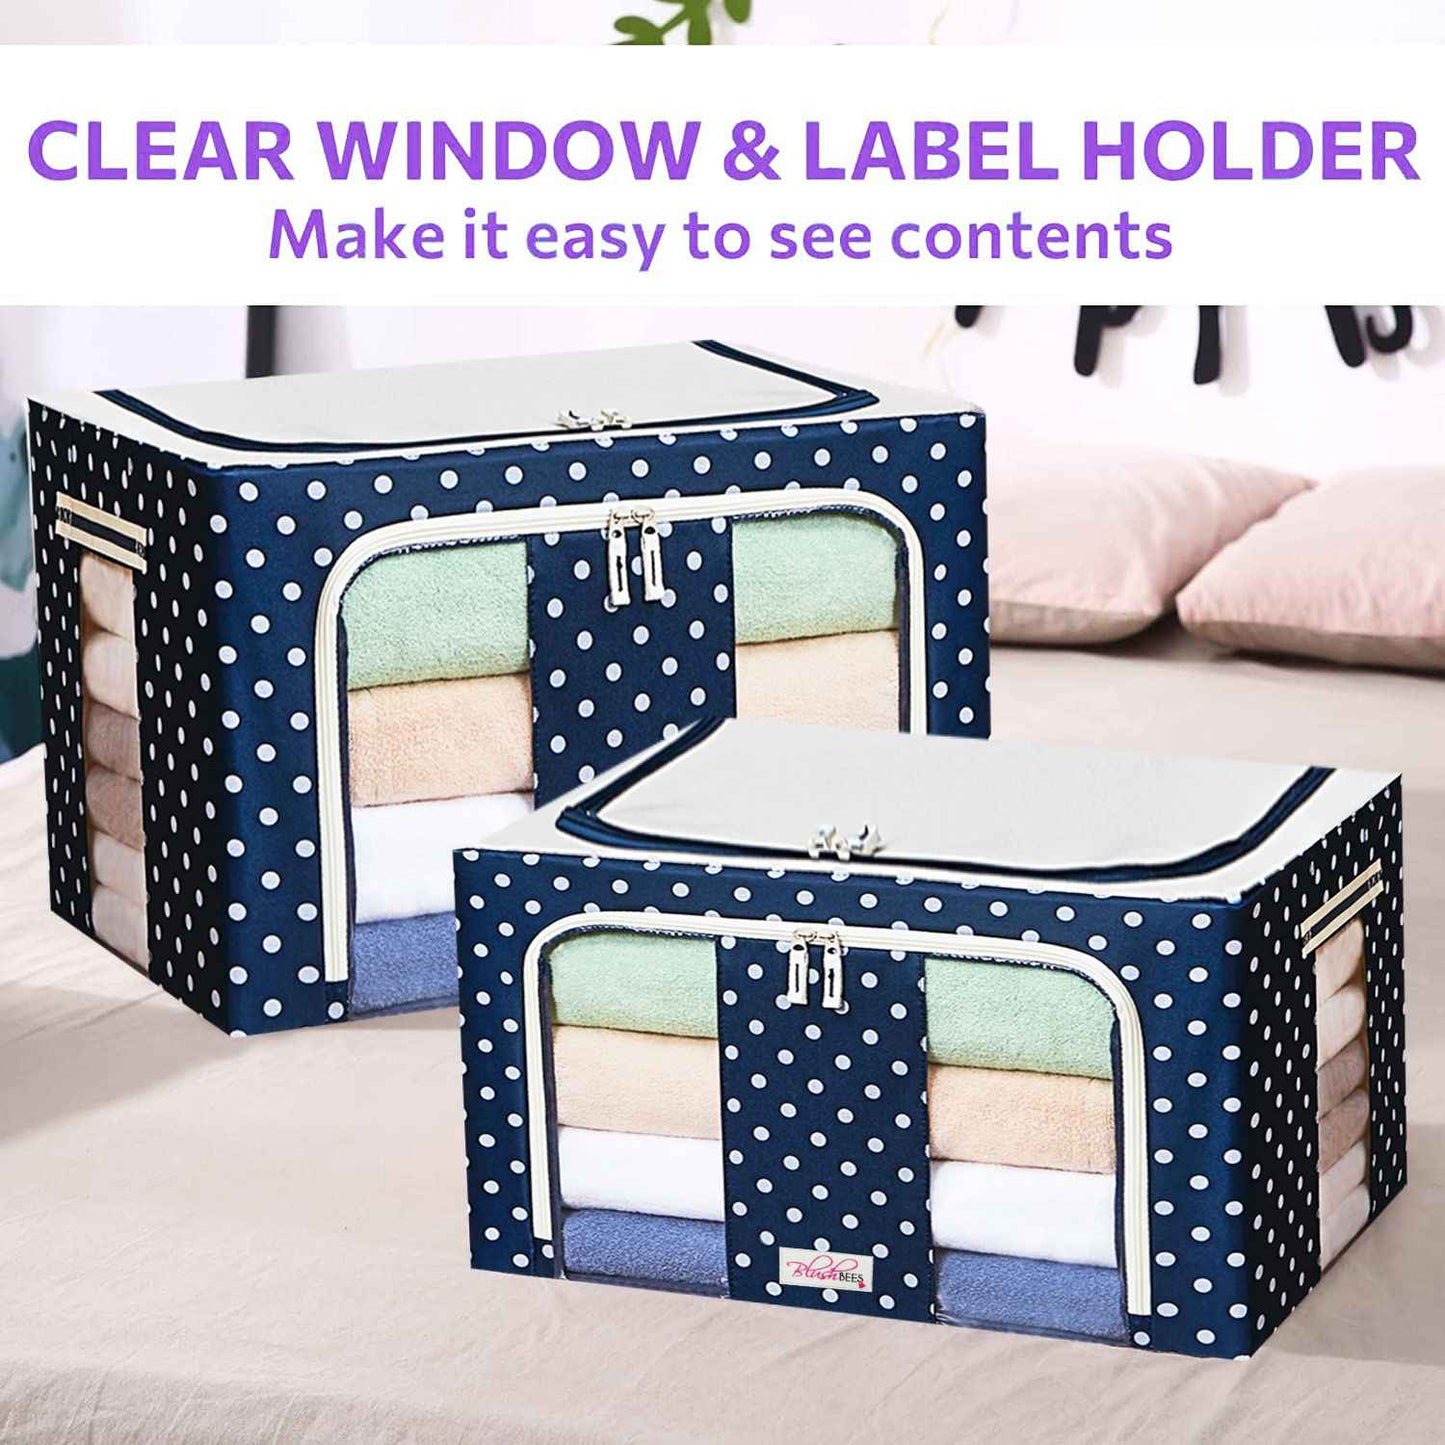 Collapsible Oxford Fabric Storage Boxes